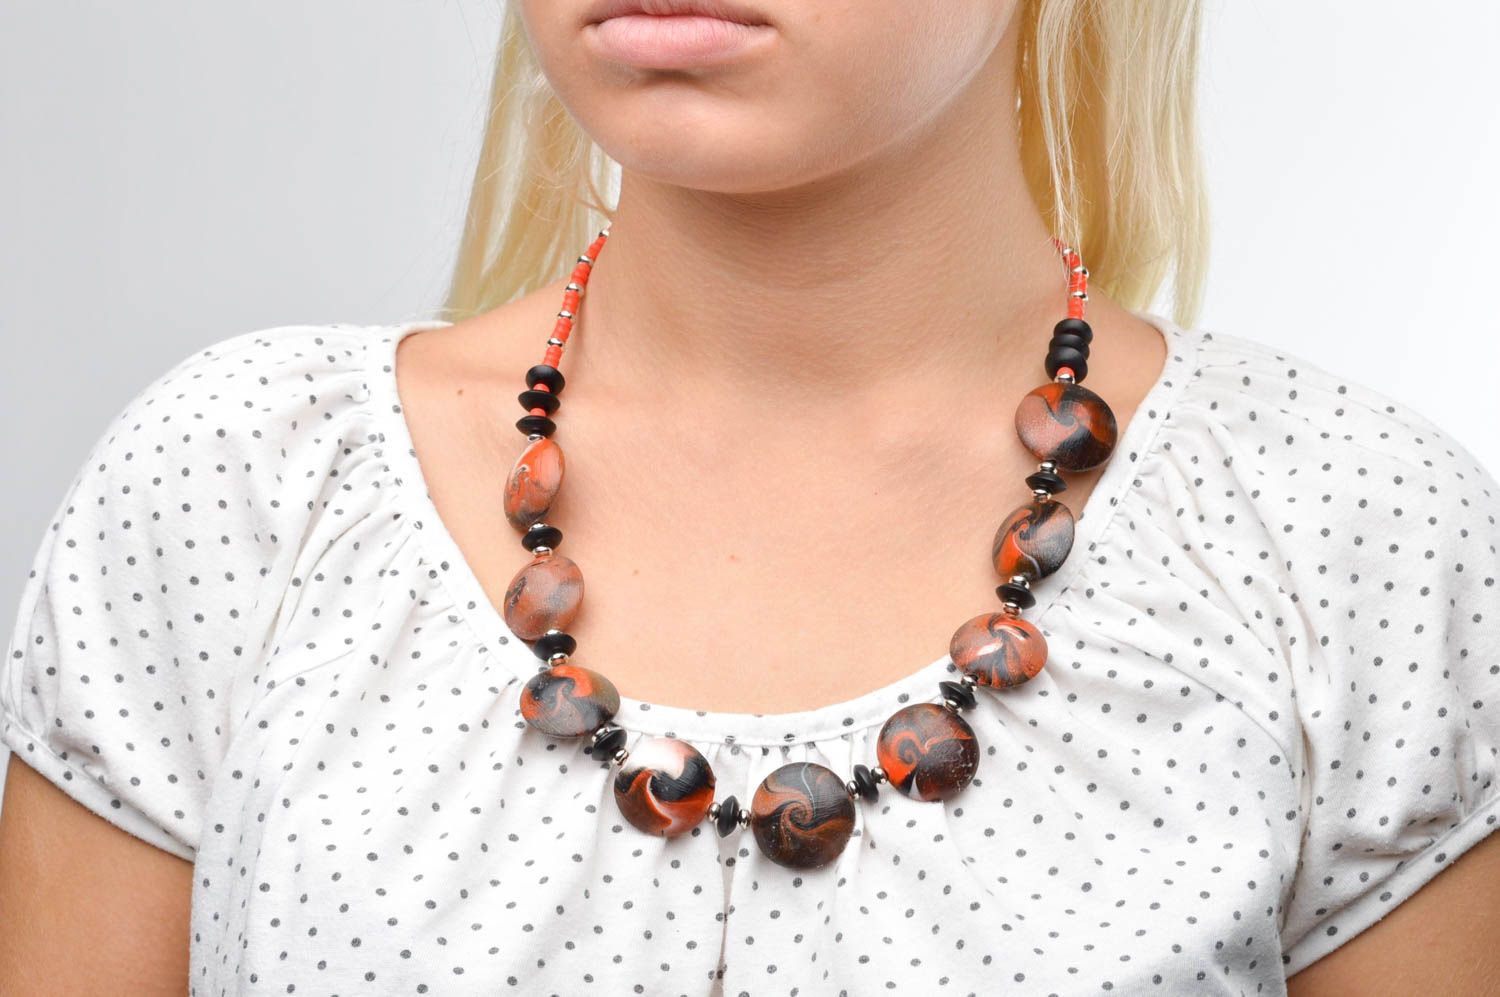 Unusual handmade plastic necklace bead necklace ideas accessories for girls photo 4